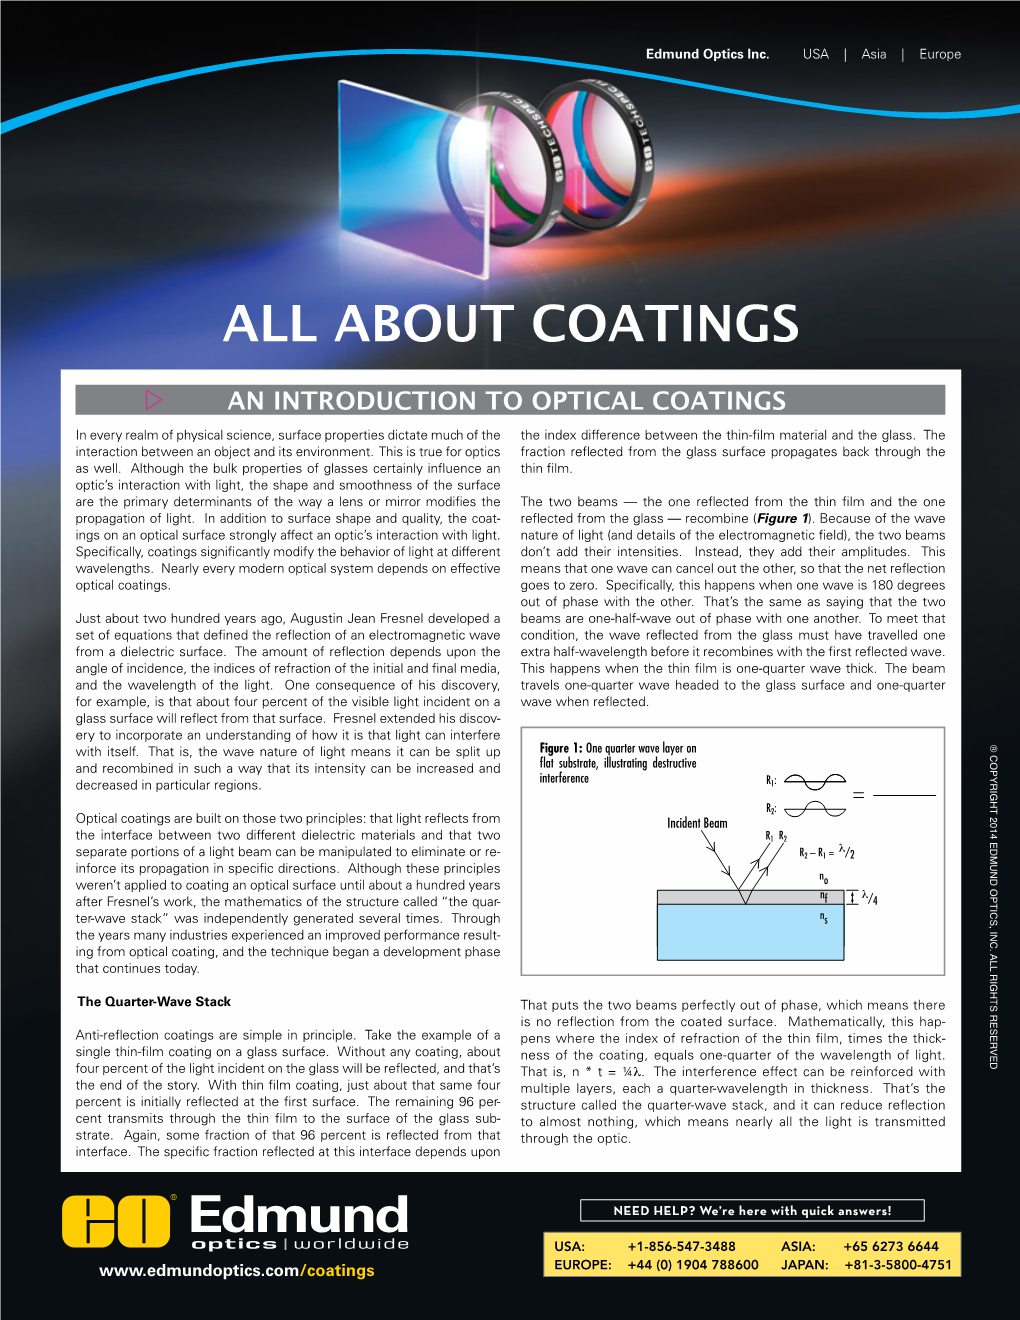 About Optical Coatings